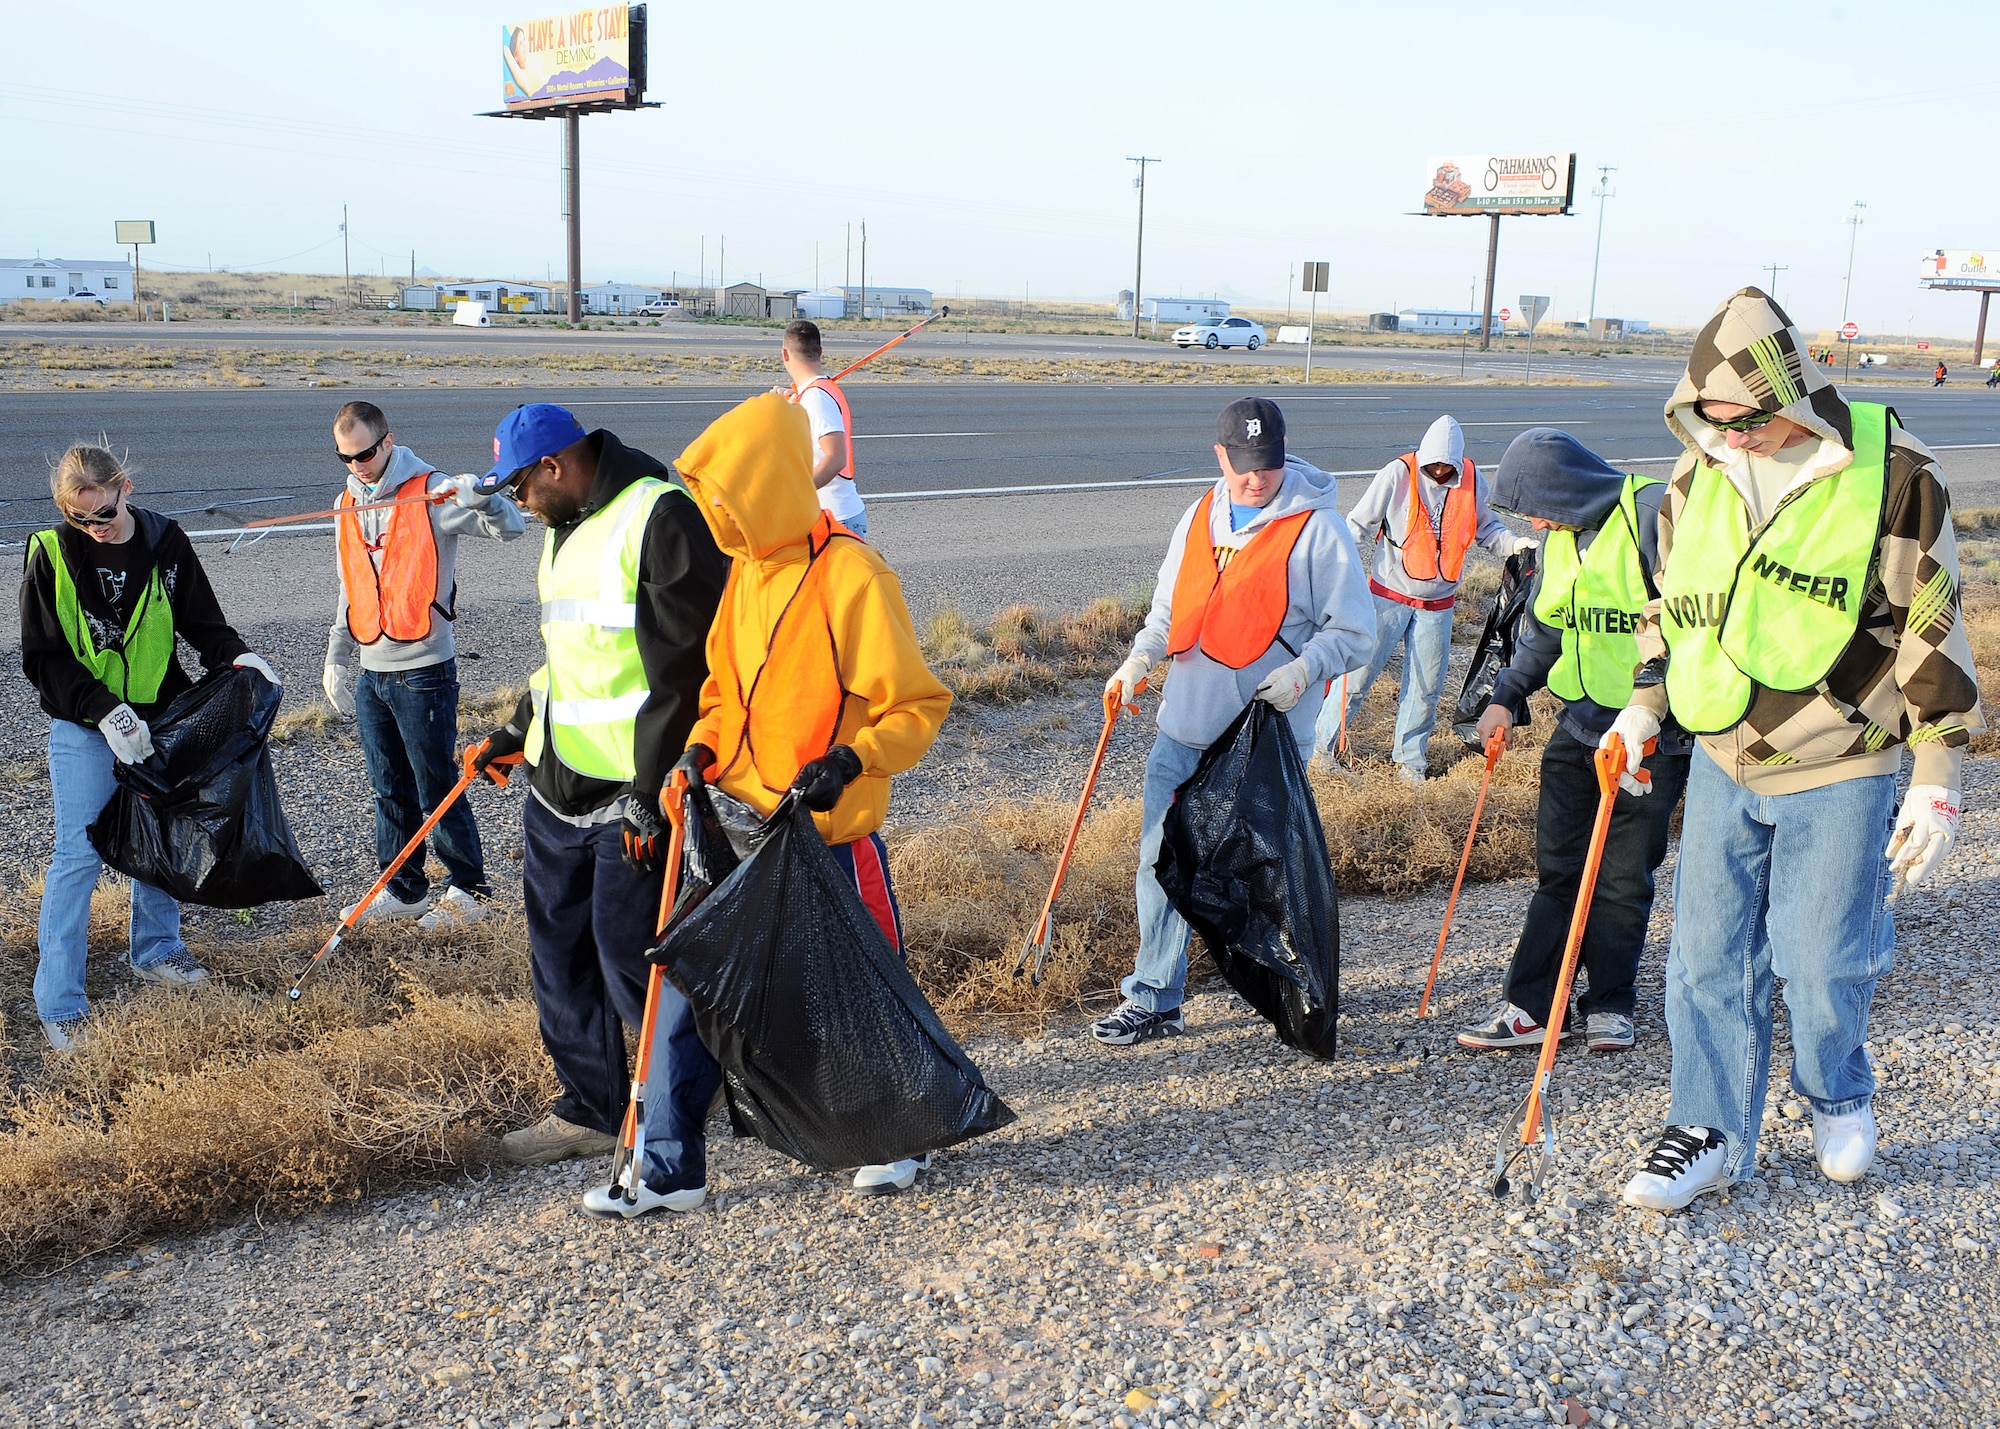 On March 3, members of Holloman Air Force Base participate in the ?Keep Alamogordo Beautiful? program by cleaning the Holloman Middle Two Council Adopt-A-Highway location on Hwy 70 between mile marker 207 and 208. The Middle Two Council adopted the piece of Hwy 70 years ago and have been maintaining it since. (U.S. Air Force photo/ Airman 1st Class DeAndre Curtiss)